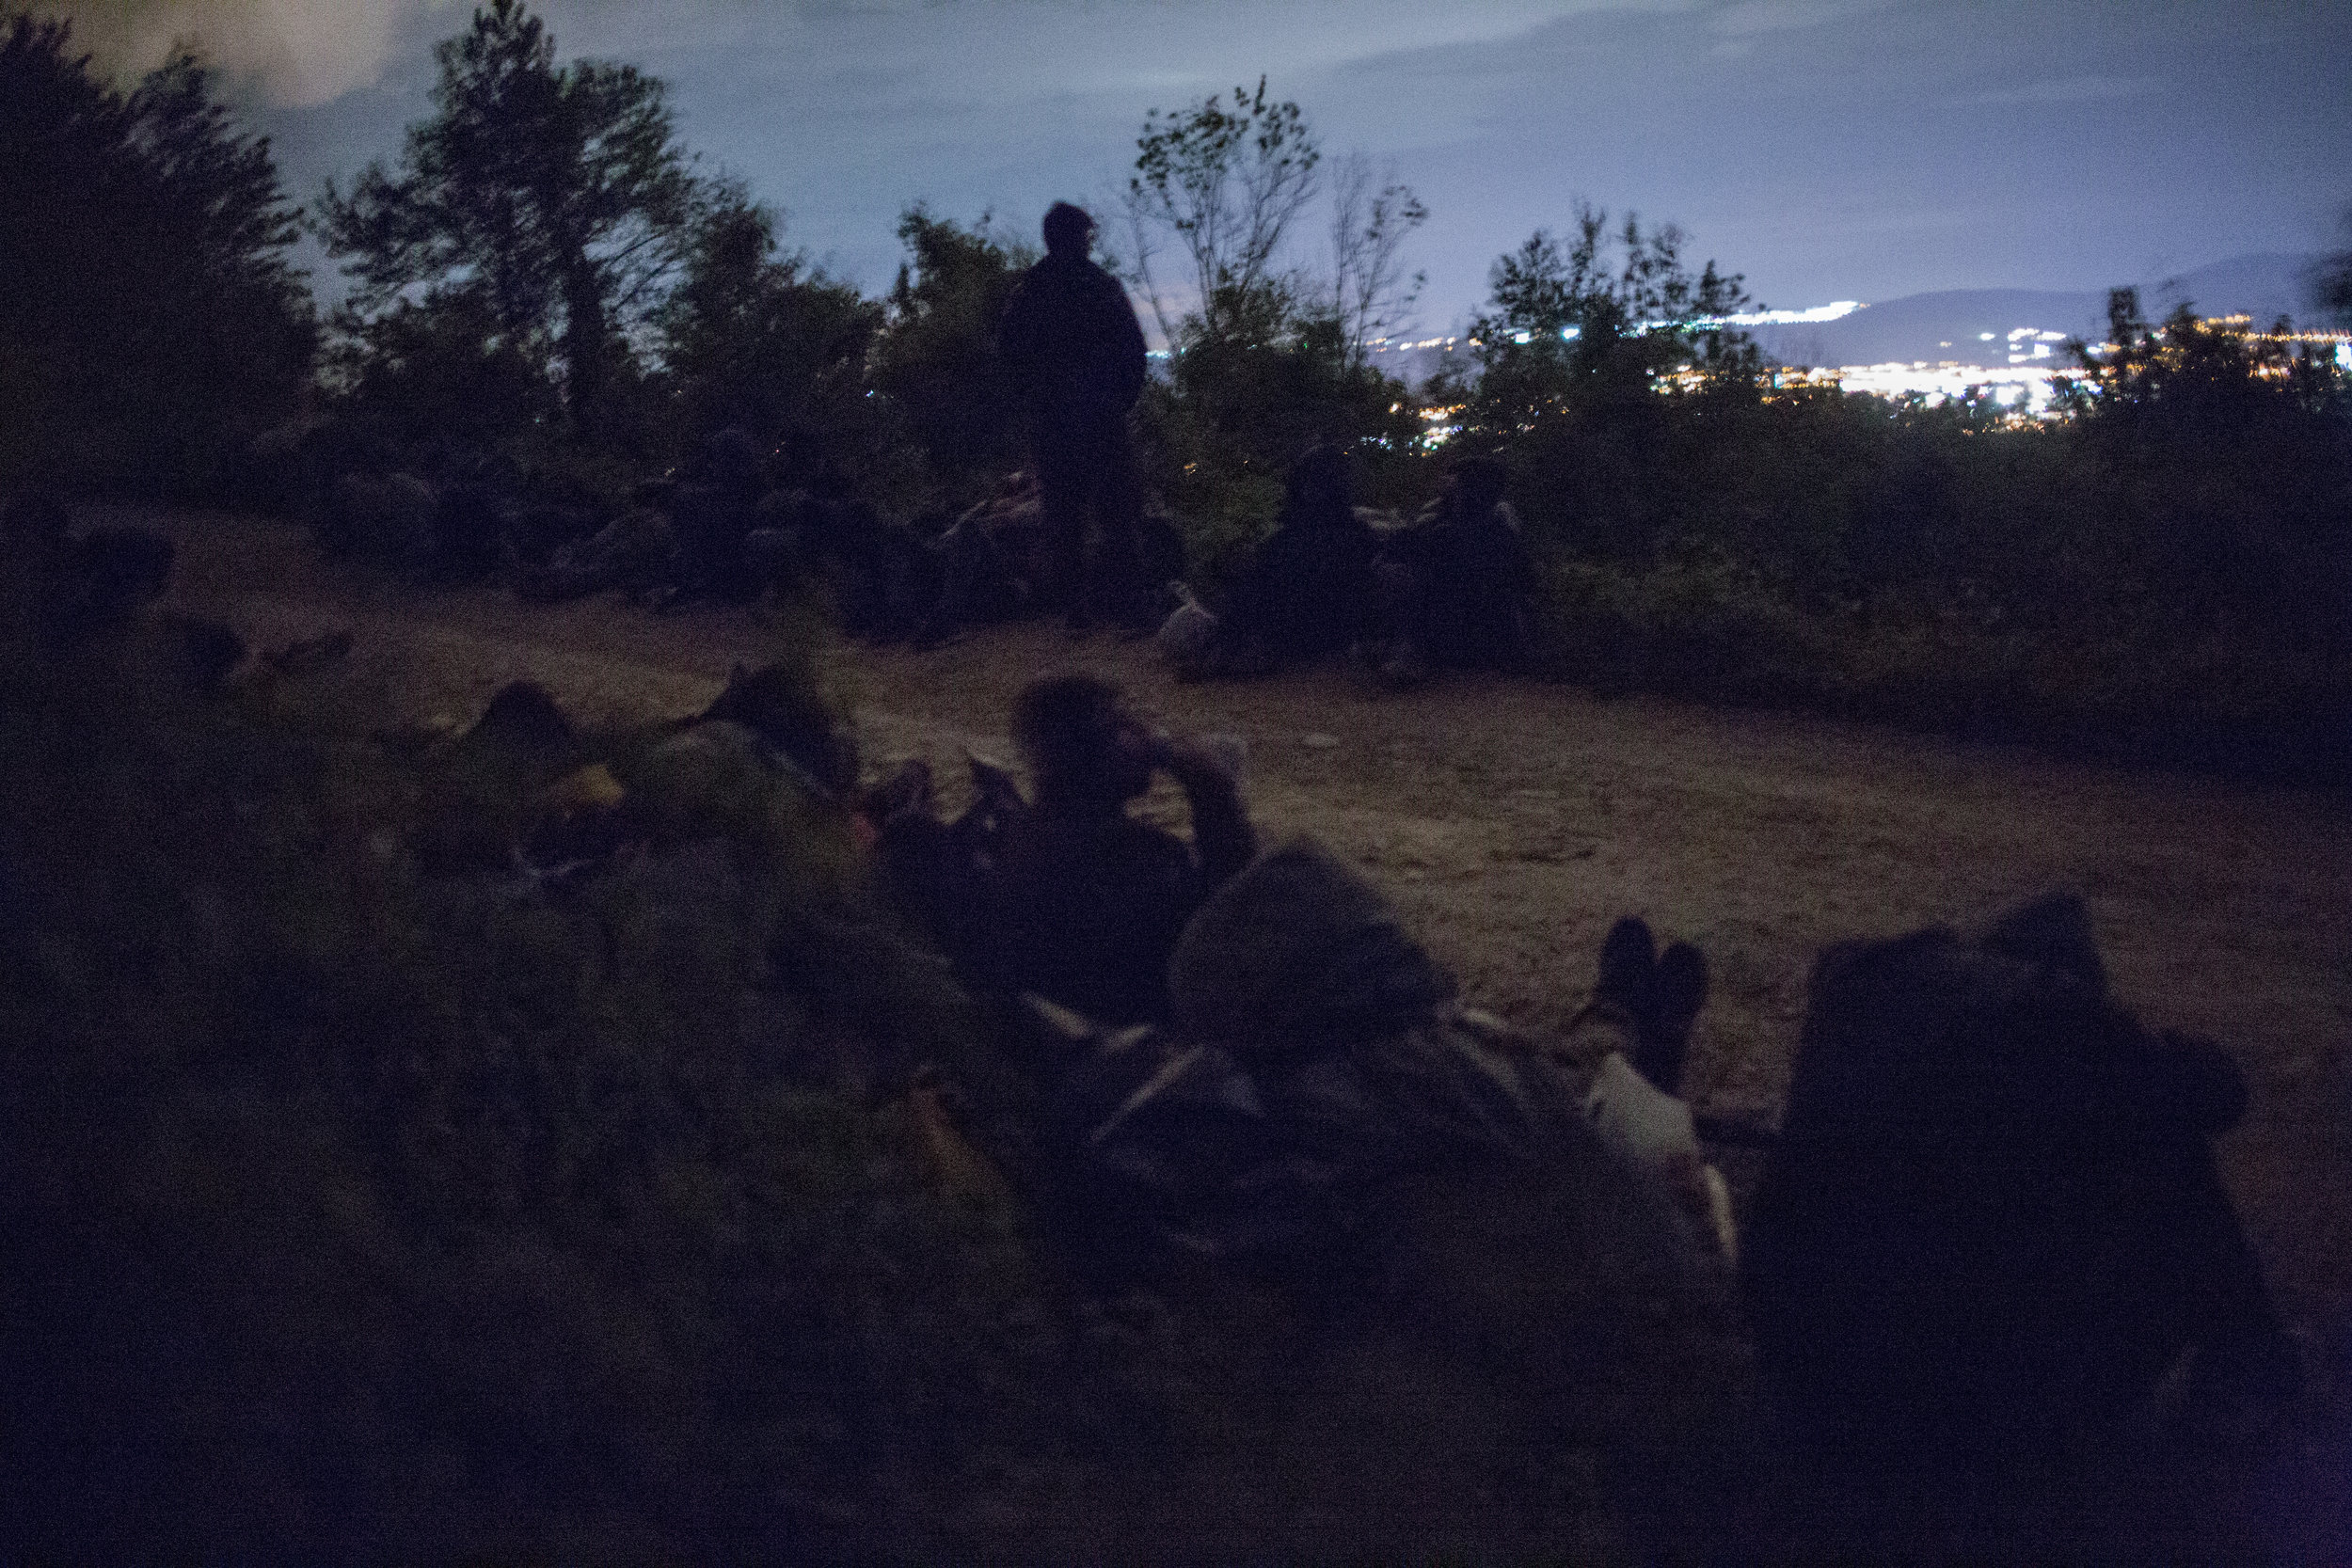  A group of refugees on a night walk near Zavalje in BiH towards Croatian border. For the most part, to avoid encountering police officers and residents, they choose less popular roads and places. The night shelters them from unwanted views. 